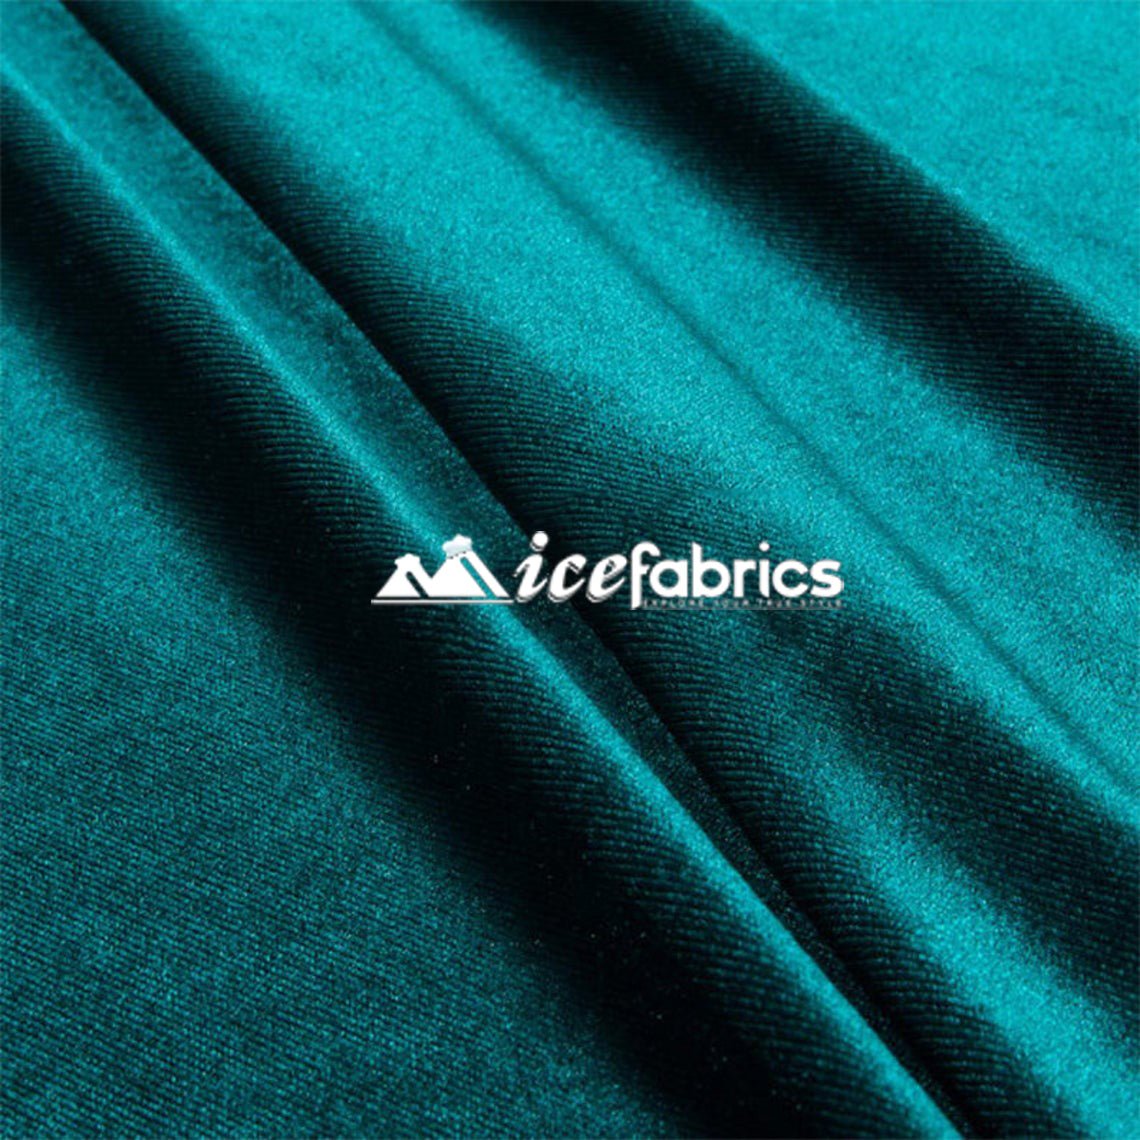 Teal Velvet Fabric By The Yard | 4 Way StretchVelvet FabricICE FABRICSICE FABRICSBy The Yard (58" Wide)Teal Velvet Fabric By The Yard | 4 Way Stretch ICE FABRICS